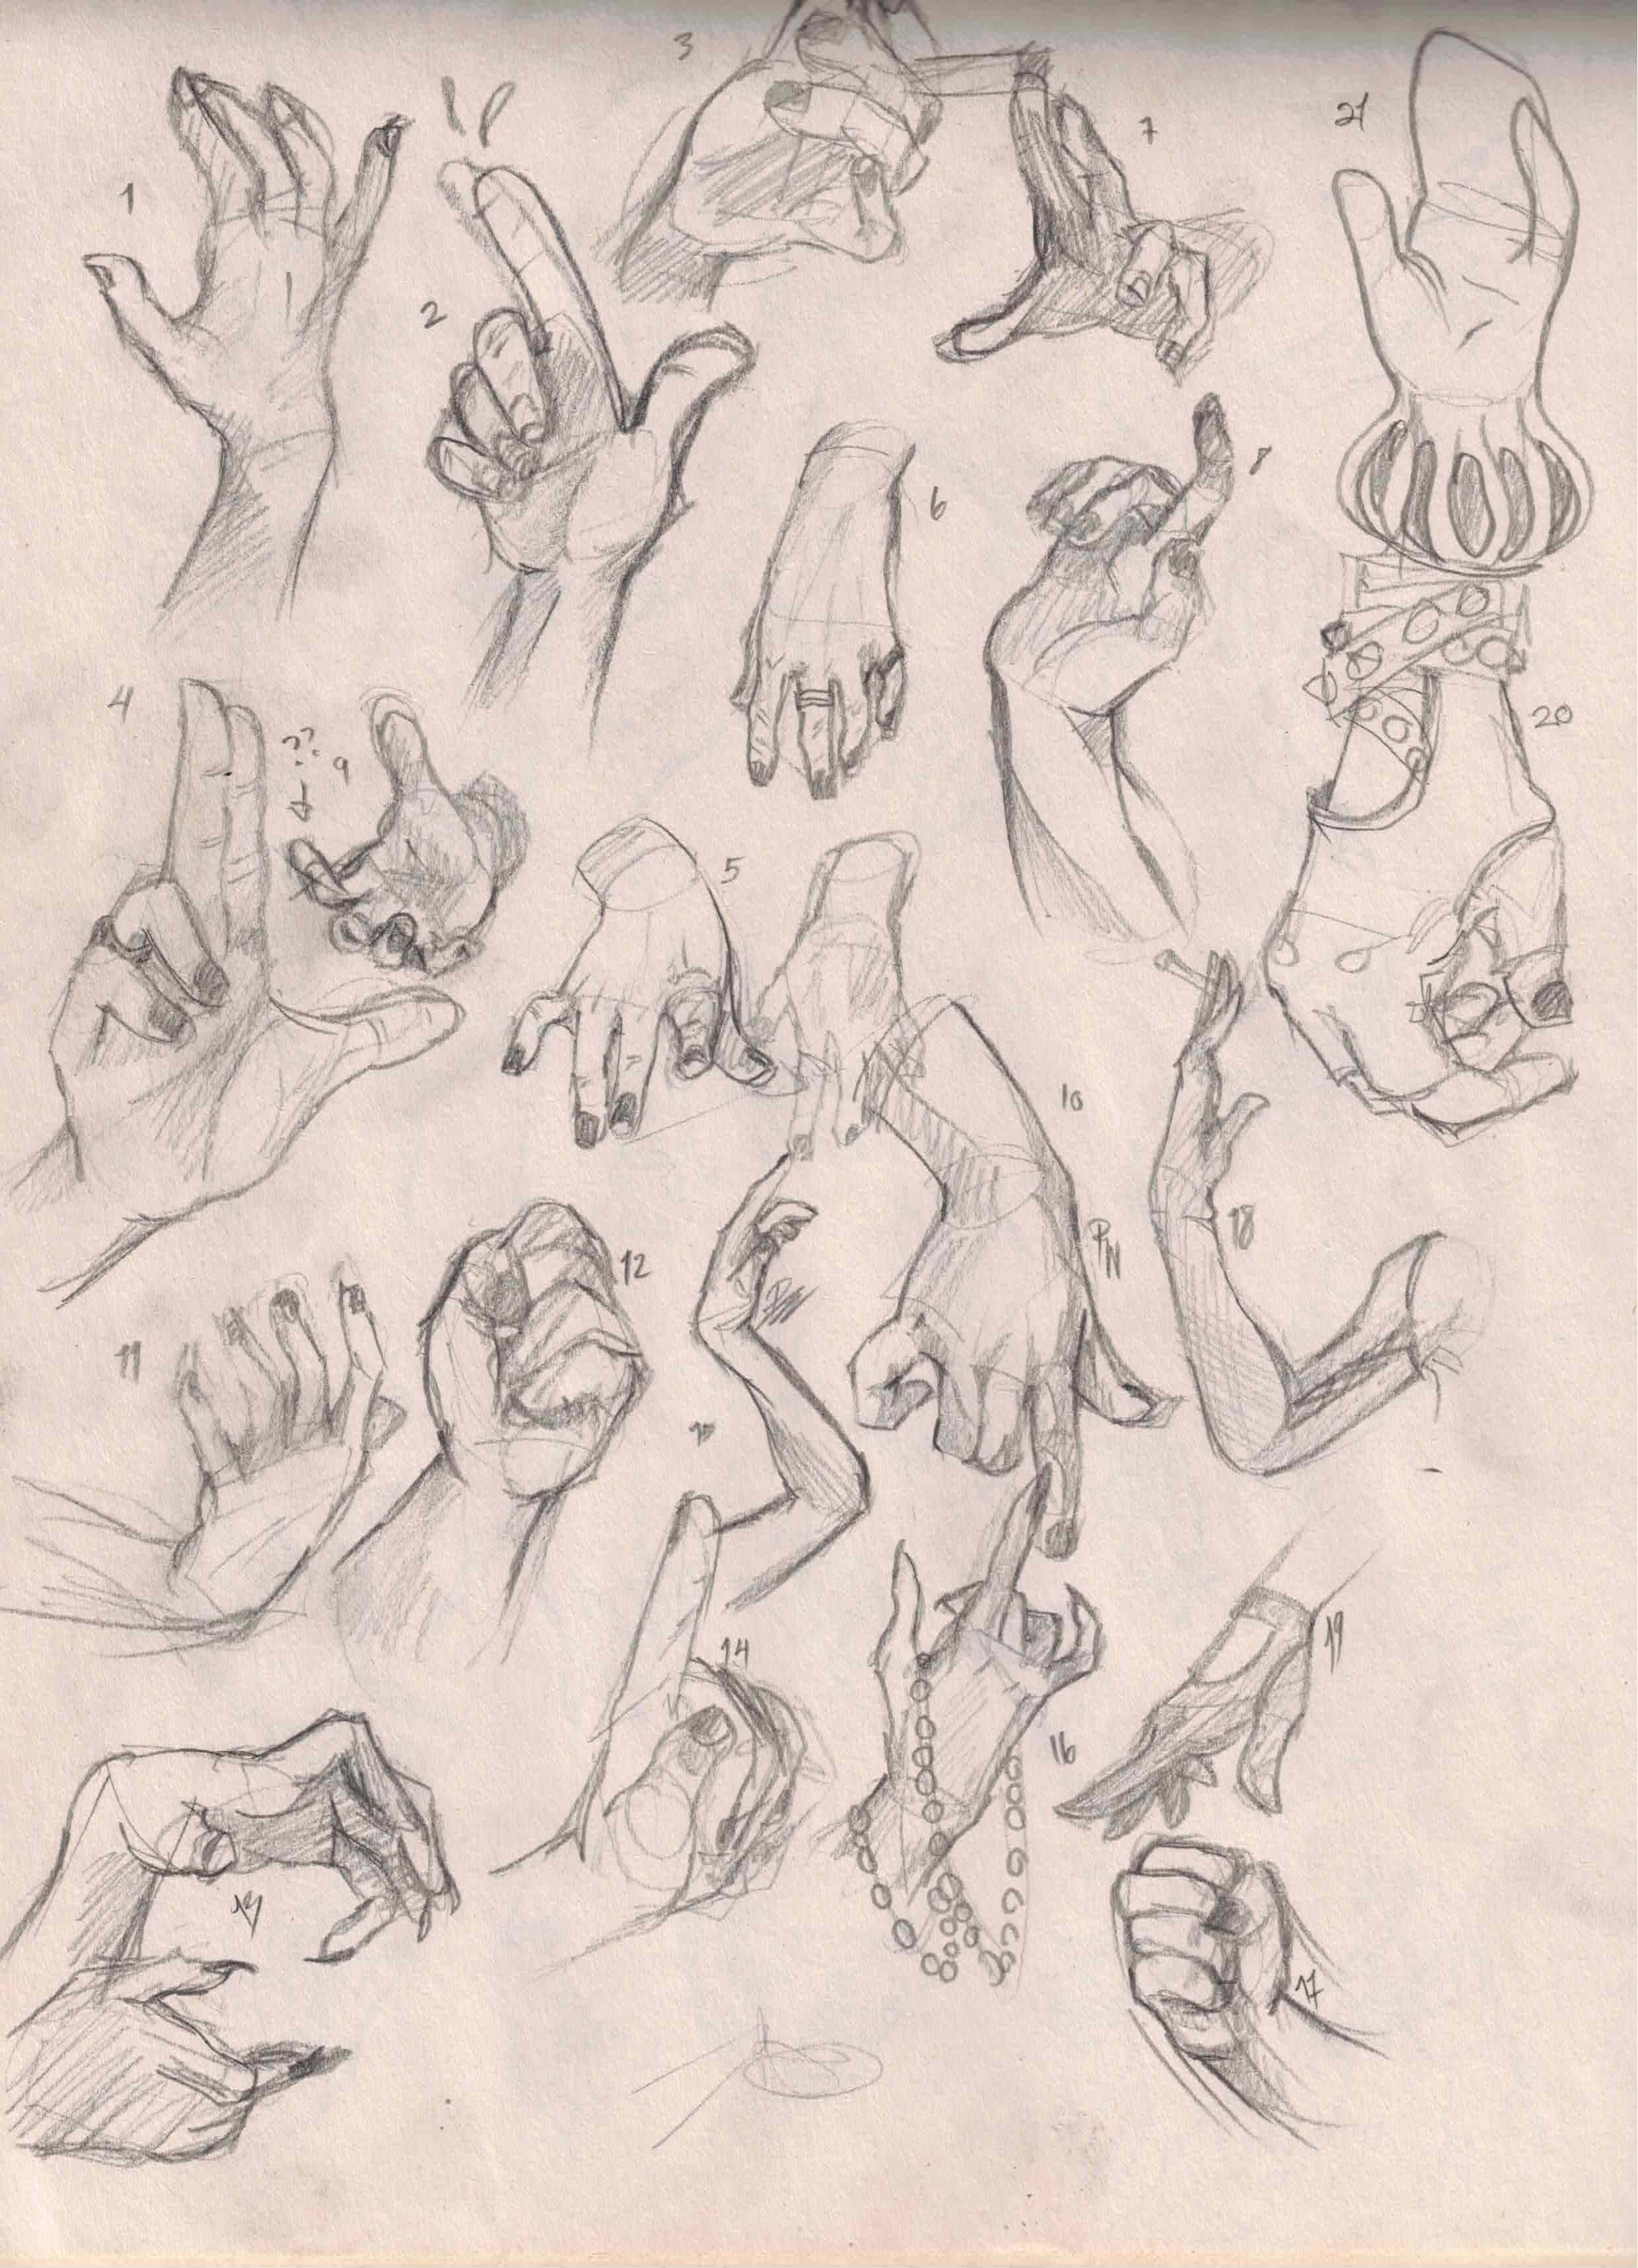 3 Minute hand sketches.